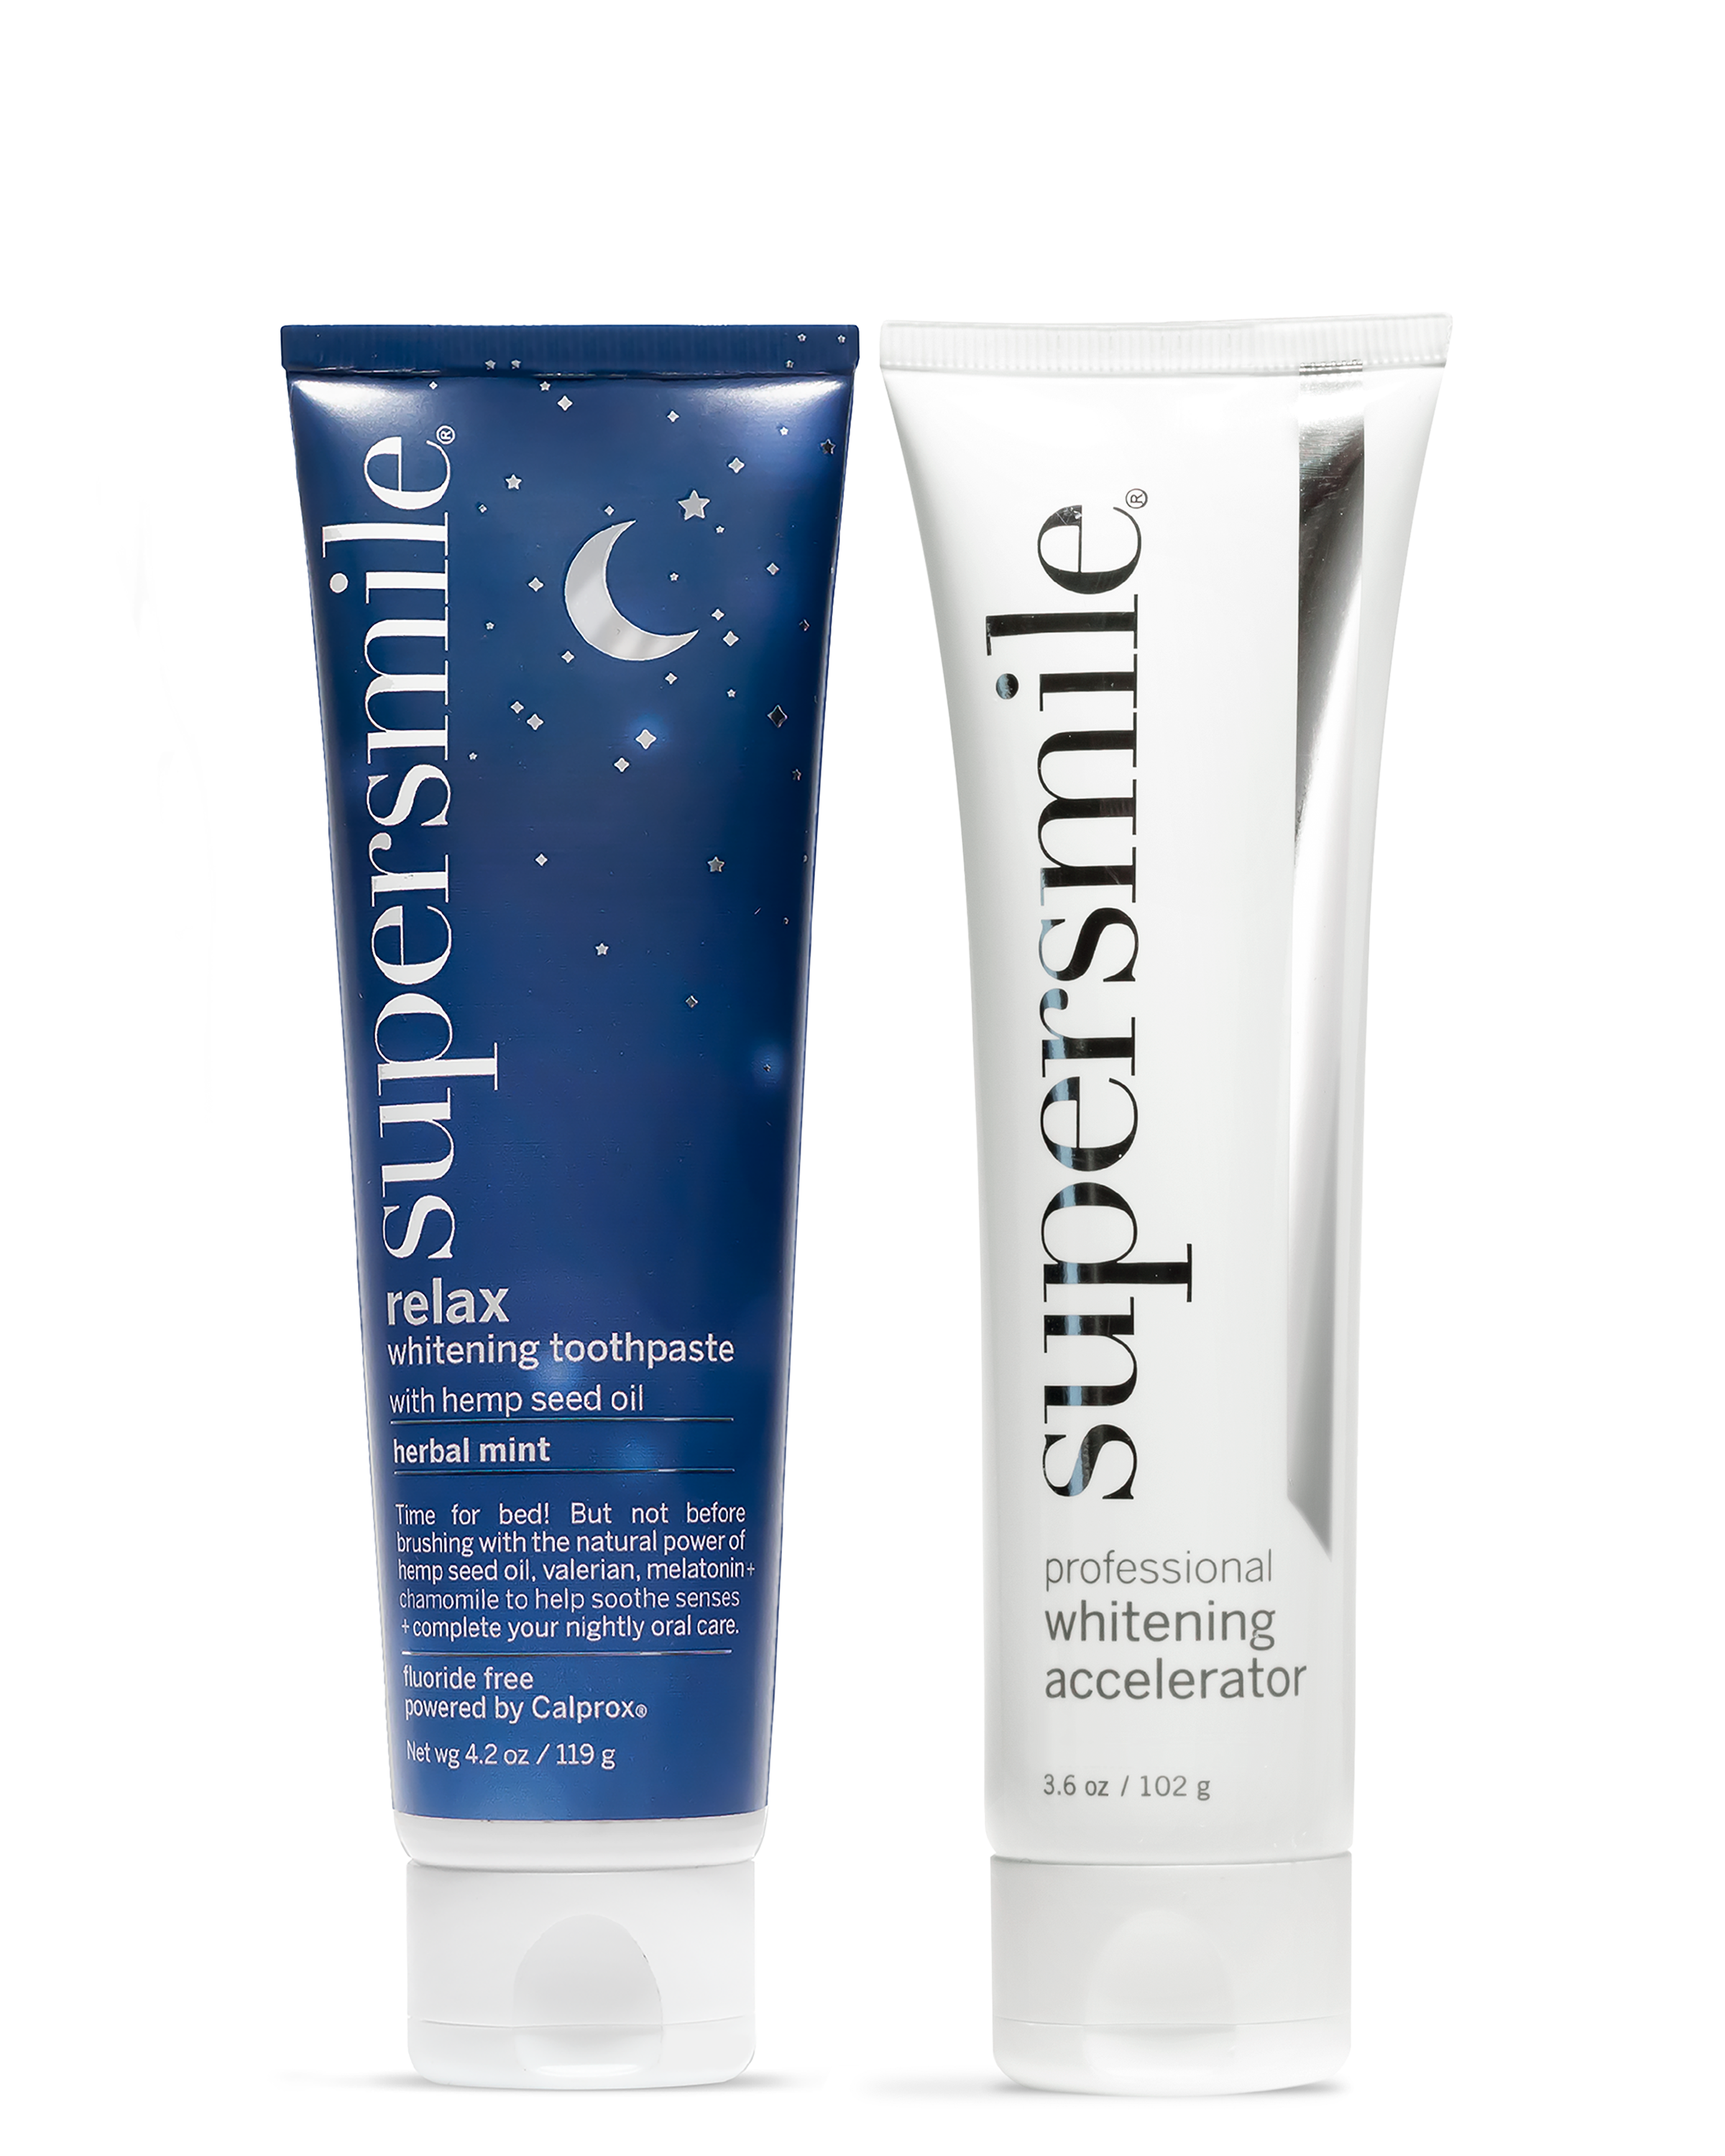 Relax Whitening Toothpaste + Accelerator Set